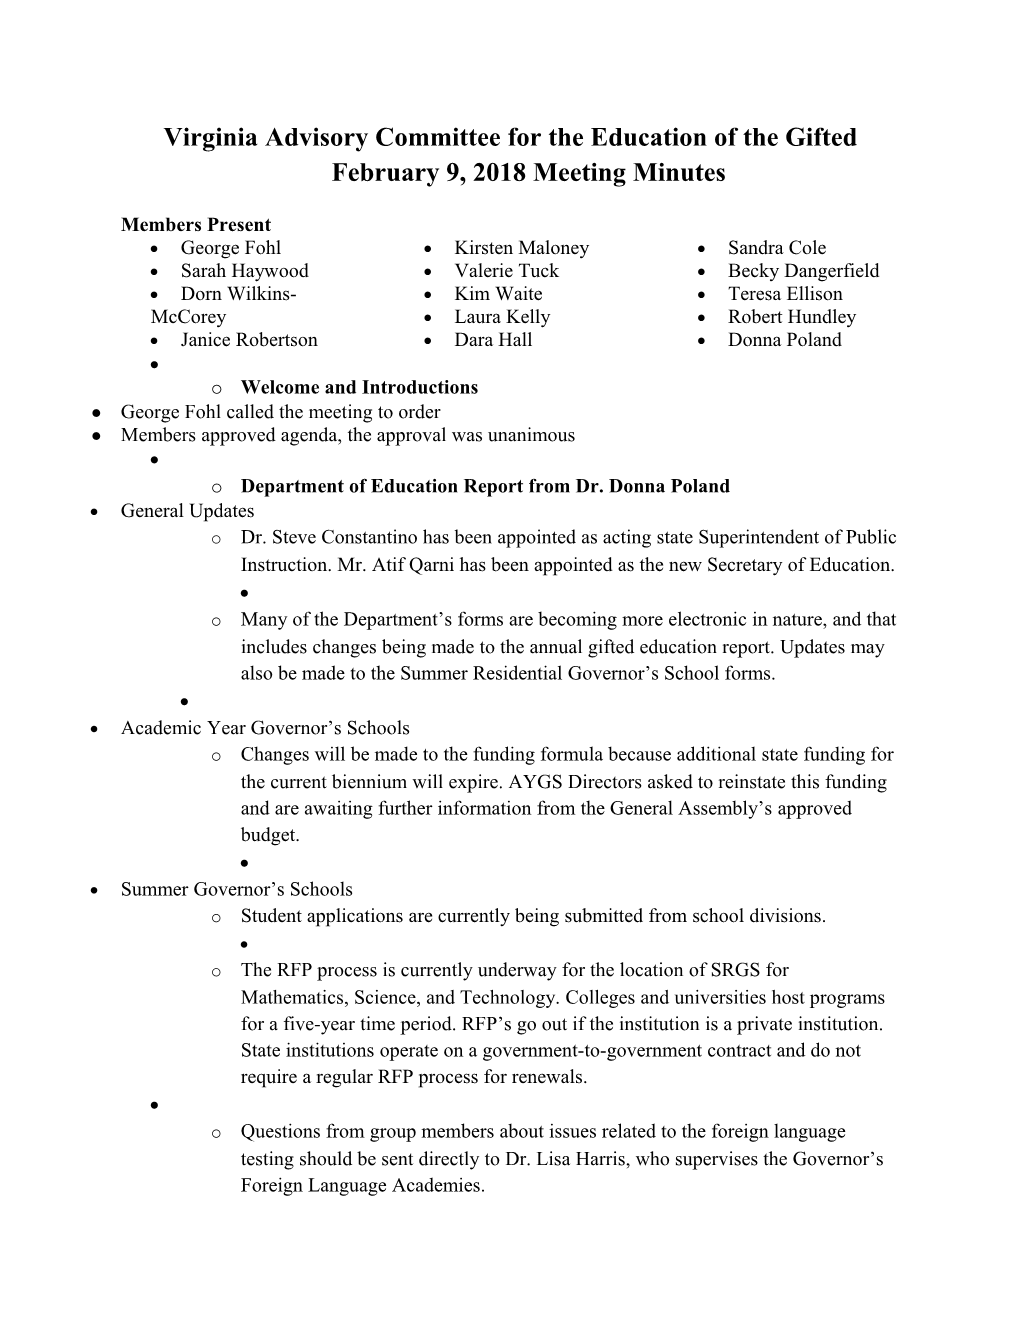 Virginia Advisory Committee for the Education of the Giftedfebruary 9, 2018 Meeting Minutes